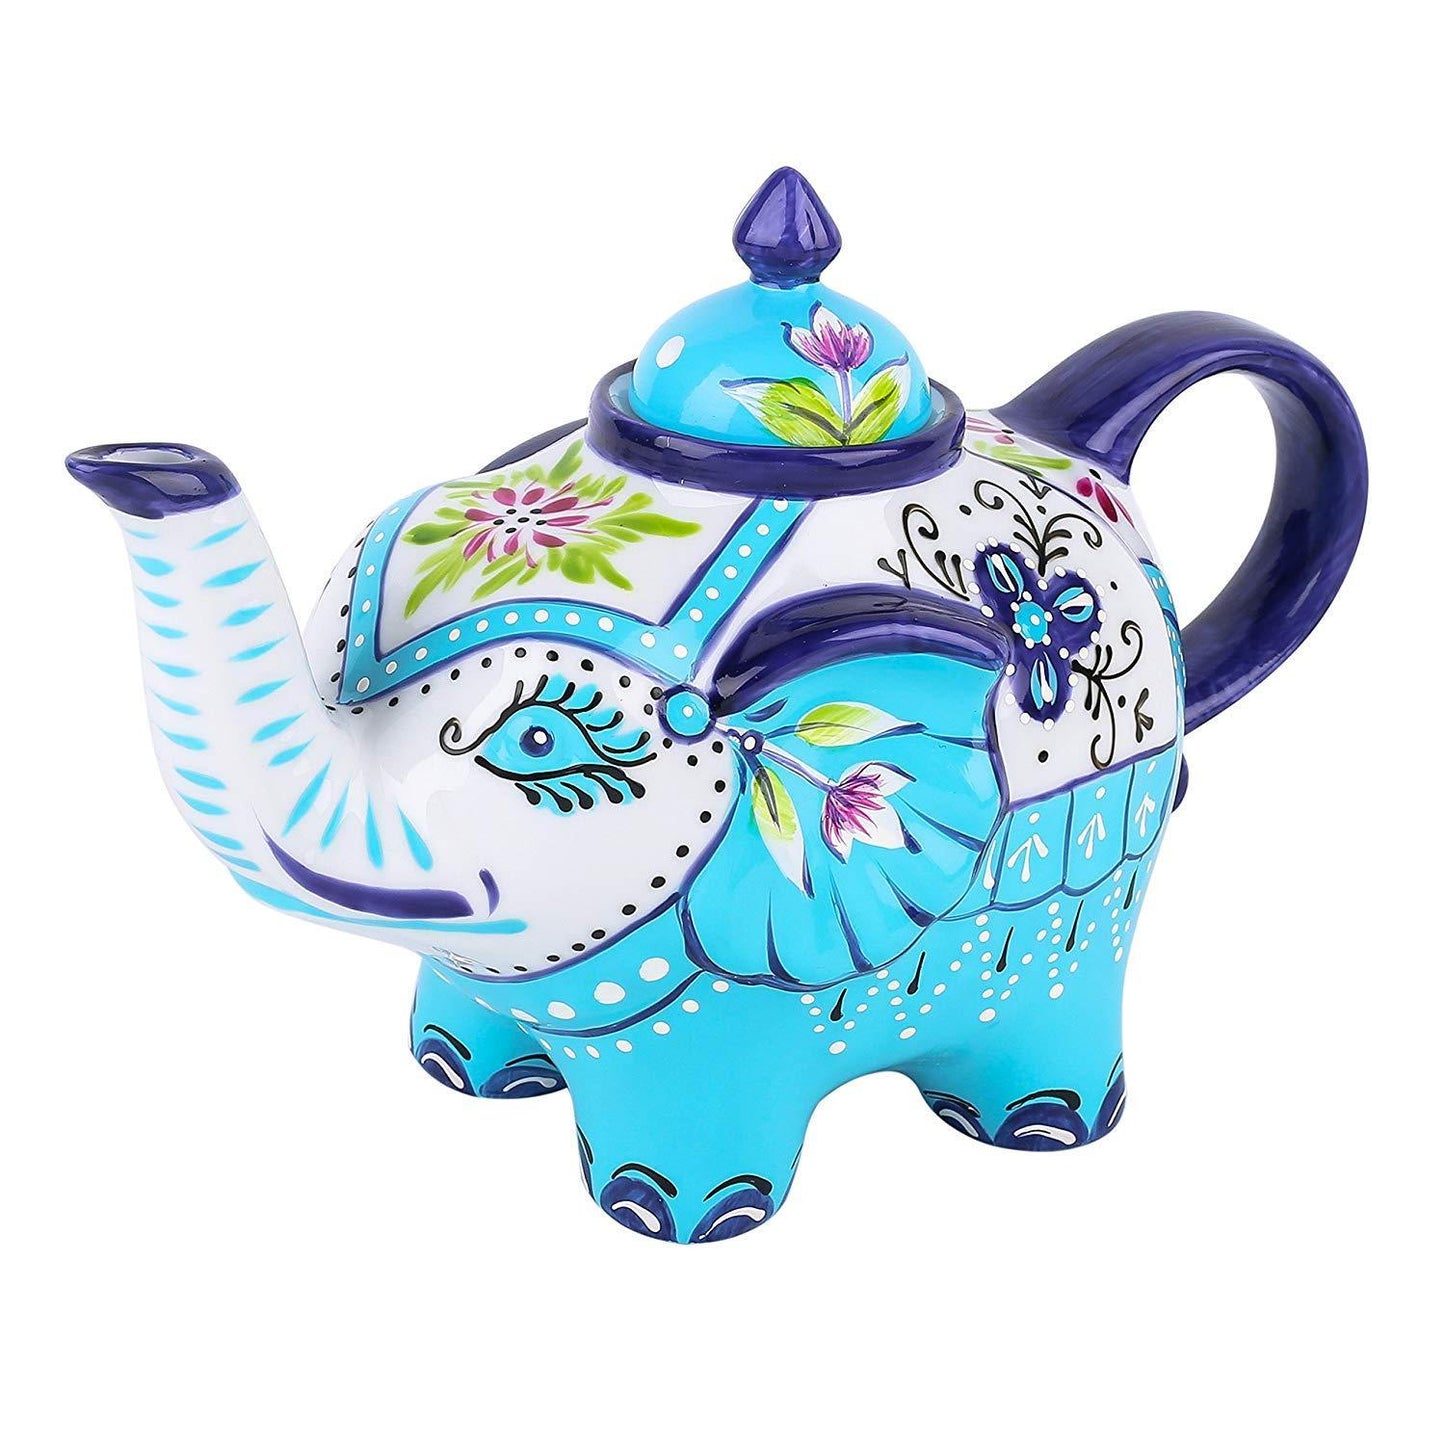 800 ml Porcelain Hand Painted Multicolor Elephant Shape Teapot Crafts with Gift Box - Nordic Side - 800, Artvigor, Box, Coffeepots, Crafts, Elephant, Family, Gift, Hand, ml, Multicolor, Offic